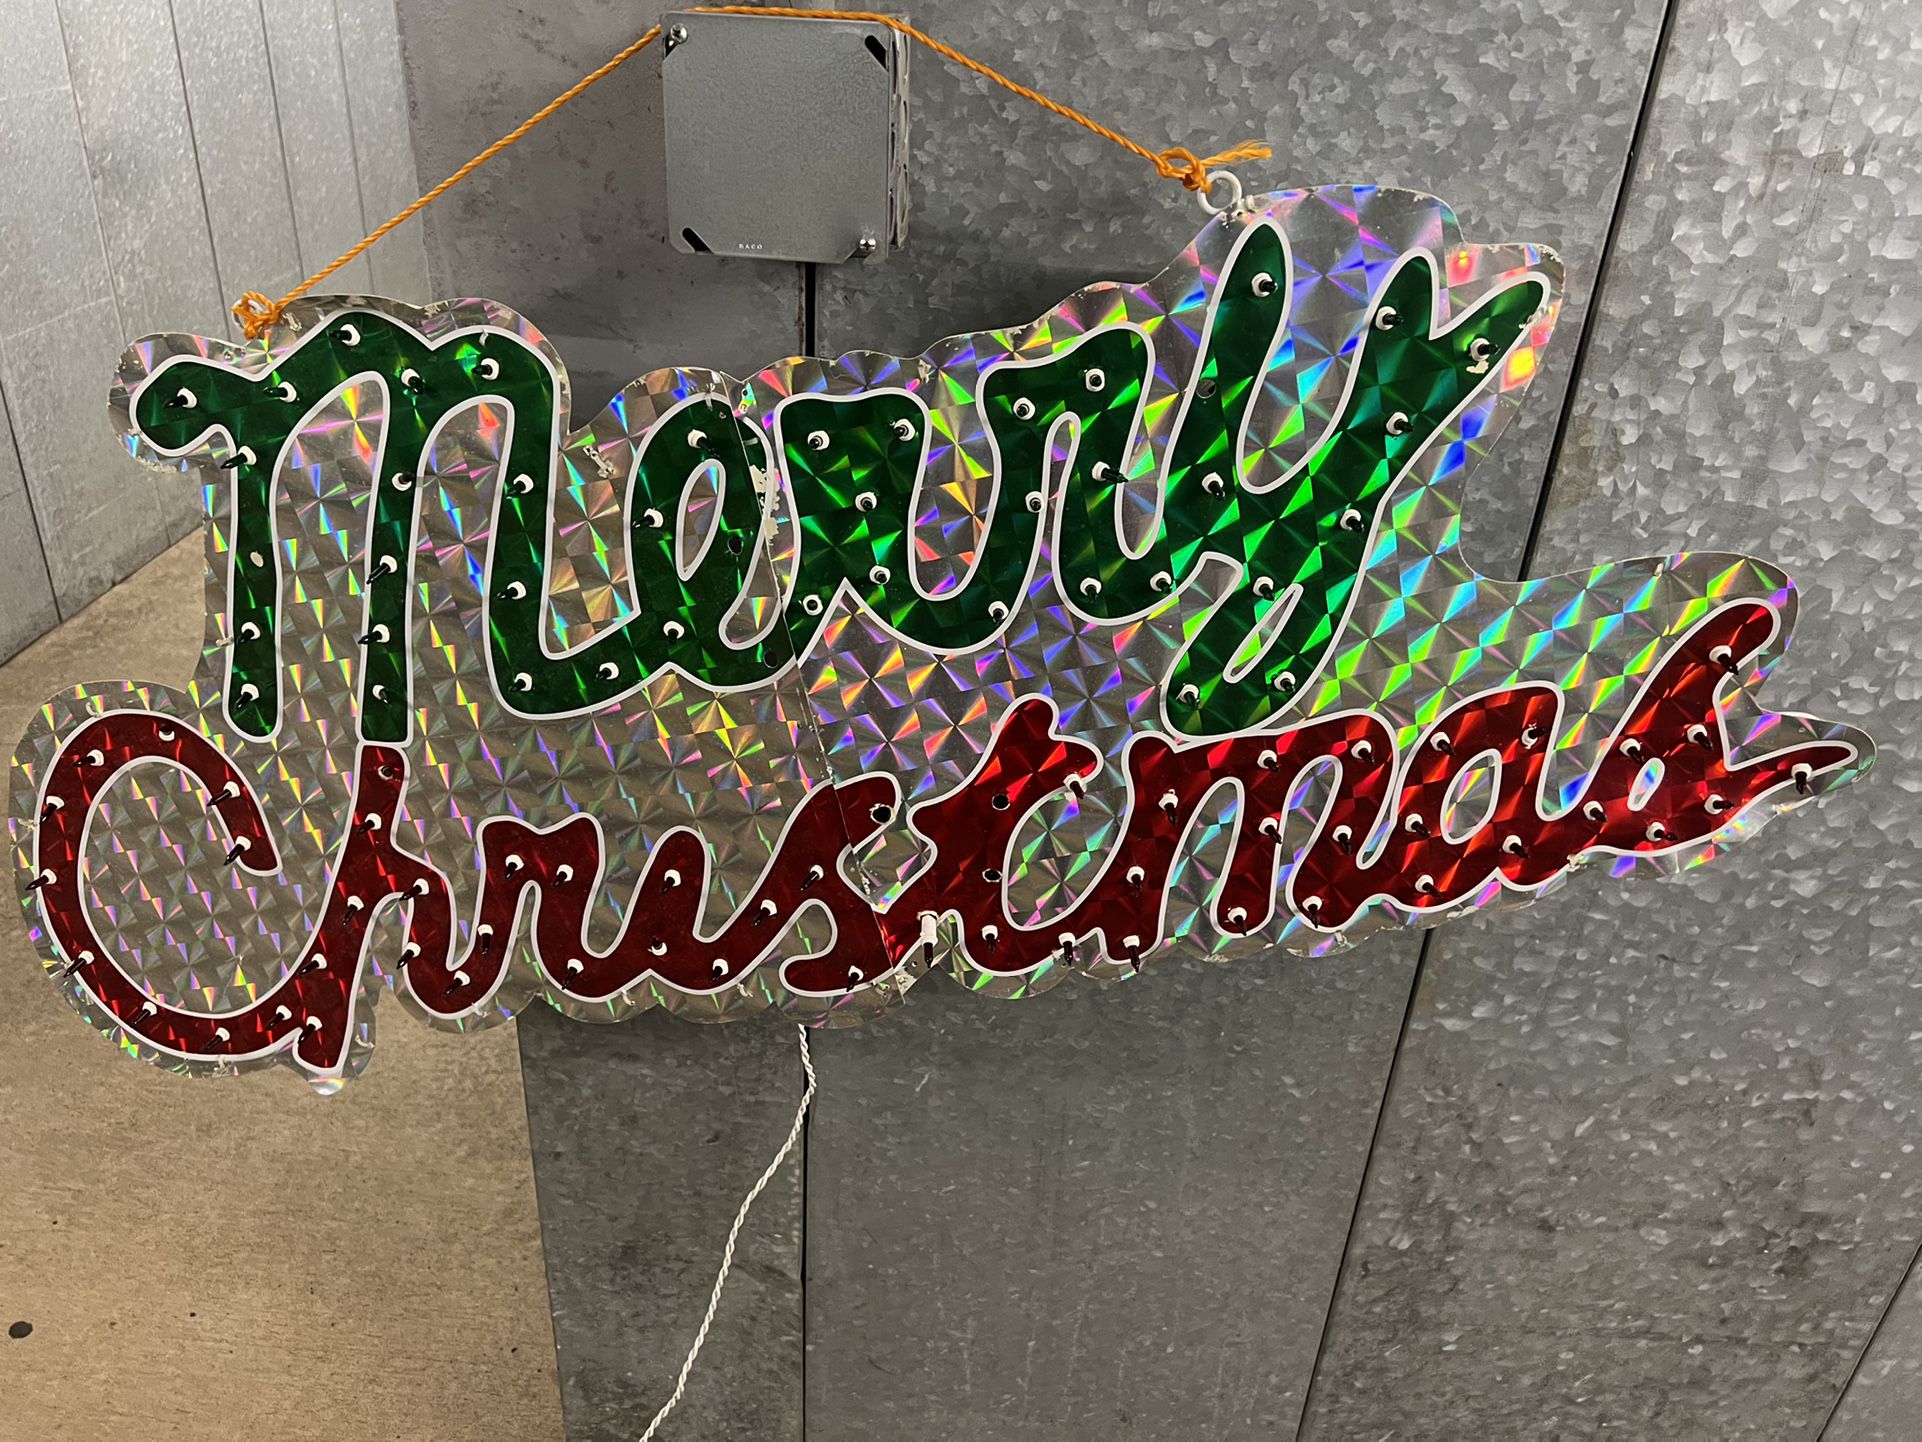 44” x 21 1/2” tall Lighted Holographic Christmas light outdoor sign/decoration 